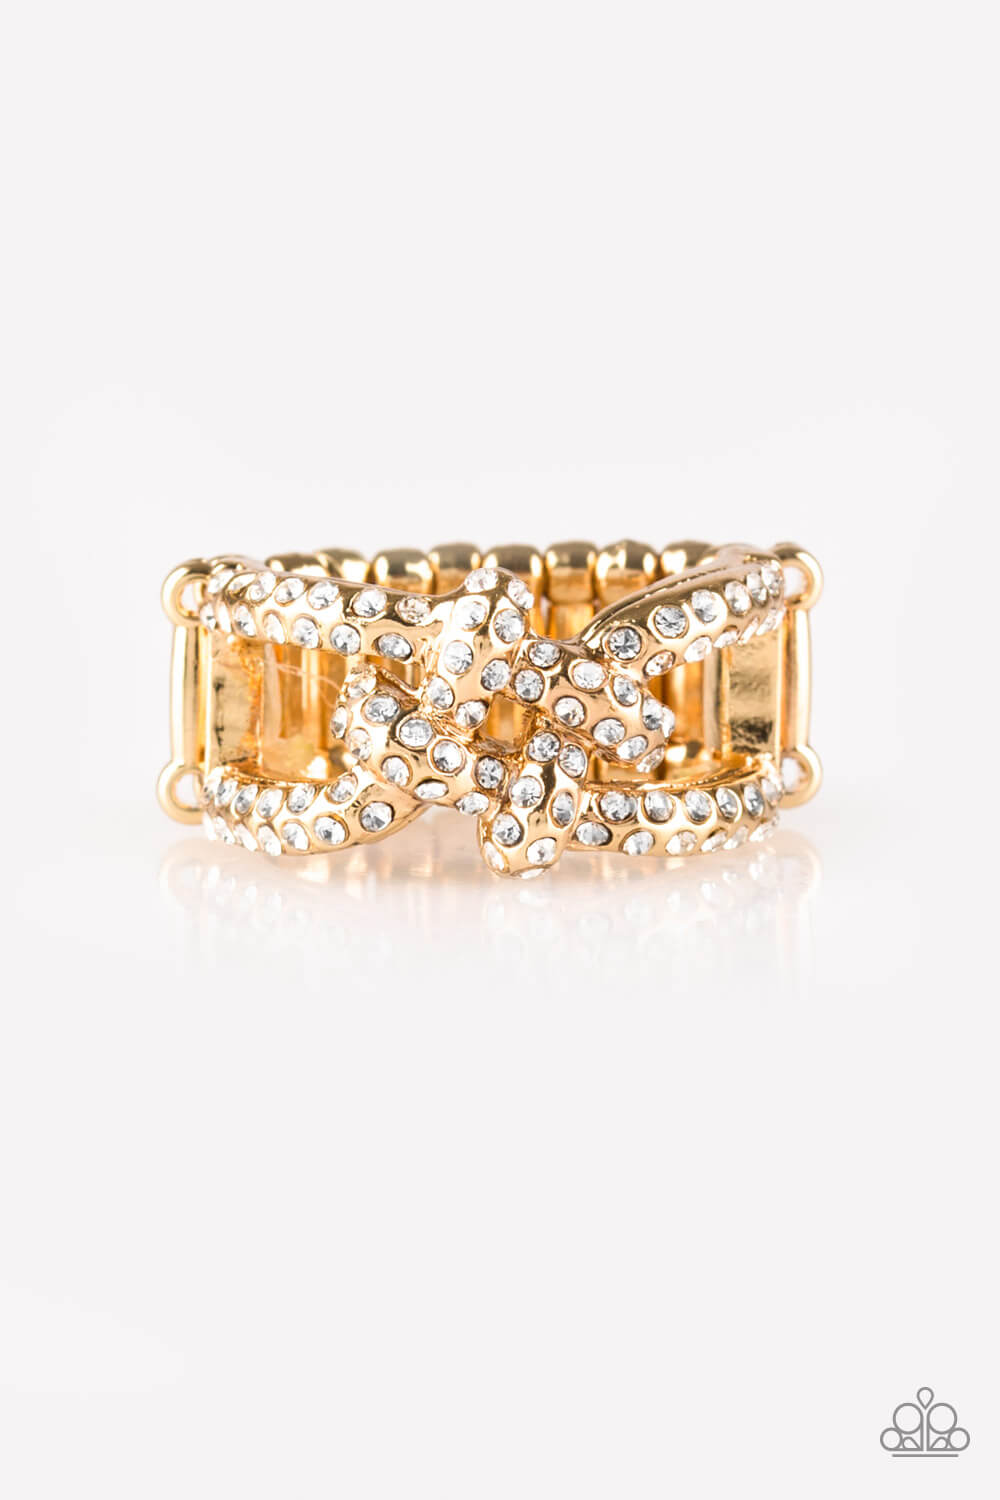 Can Only Go UPSCALE From Here - Gold Ring - Princess Glam Shop